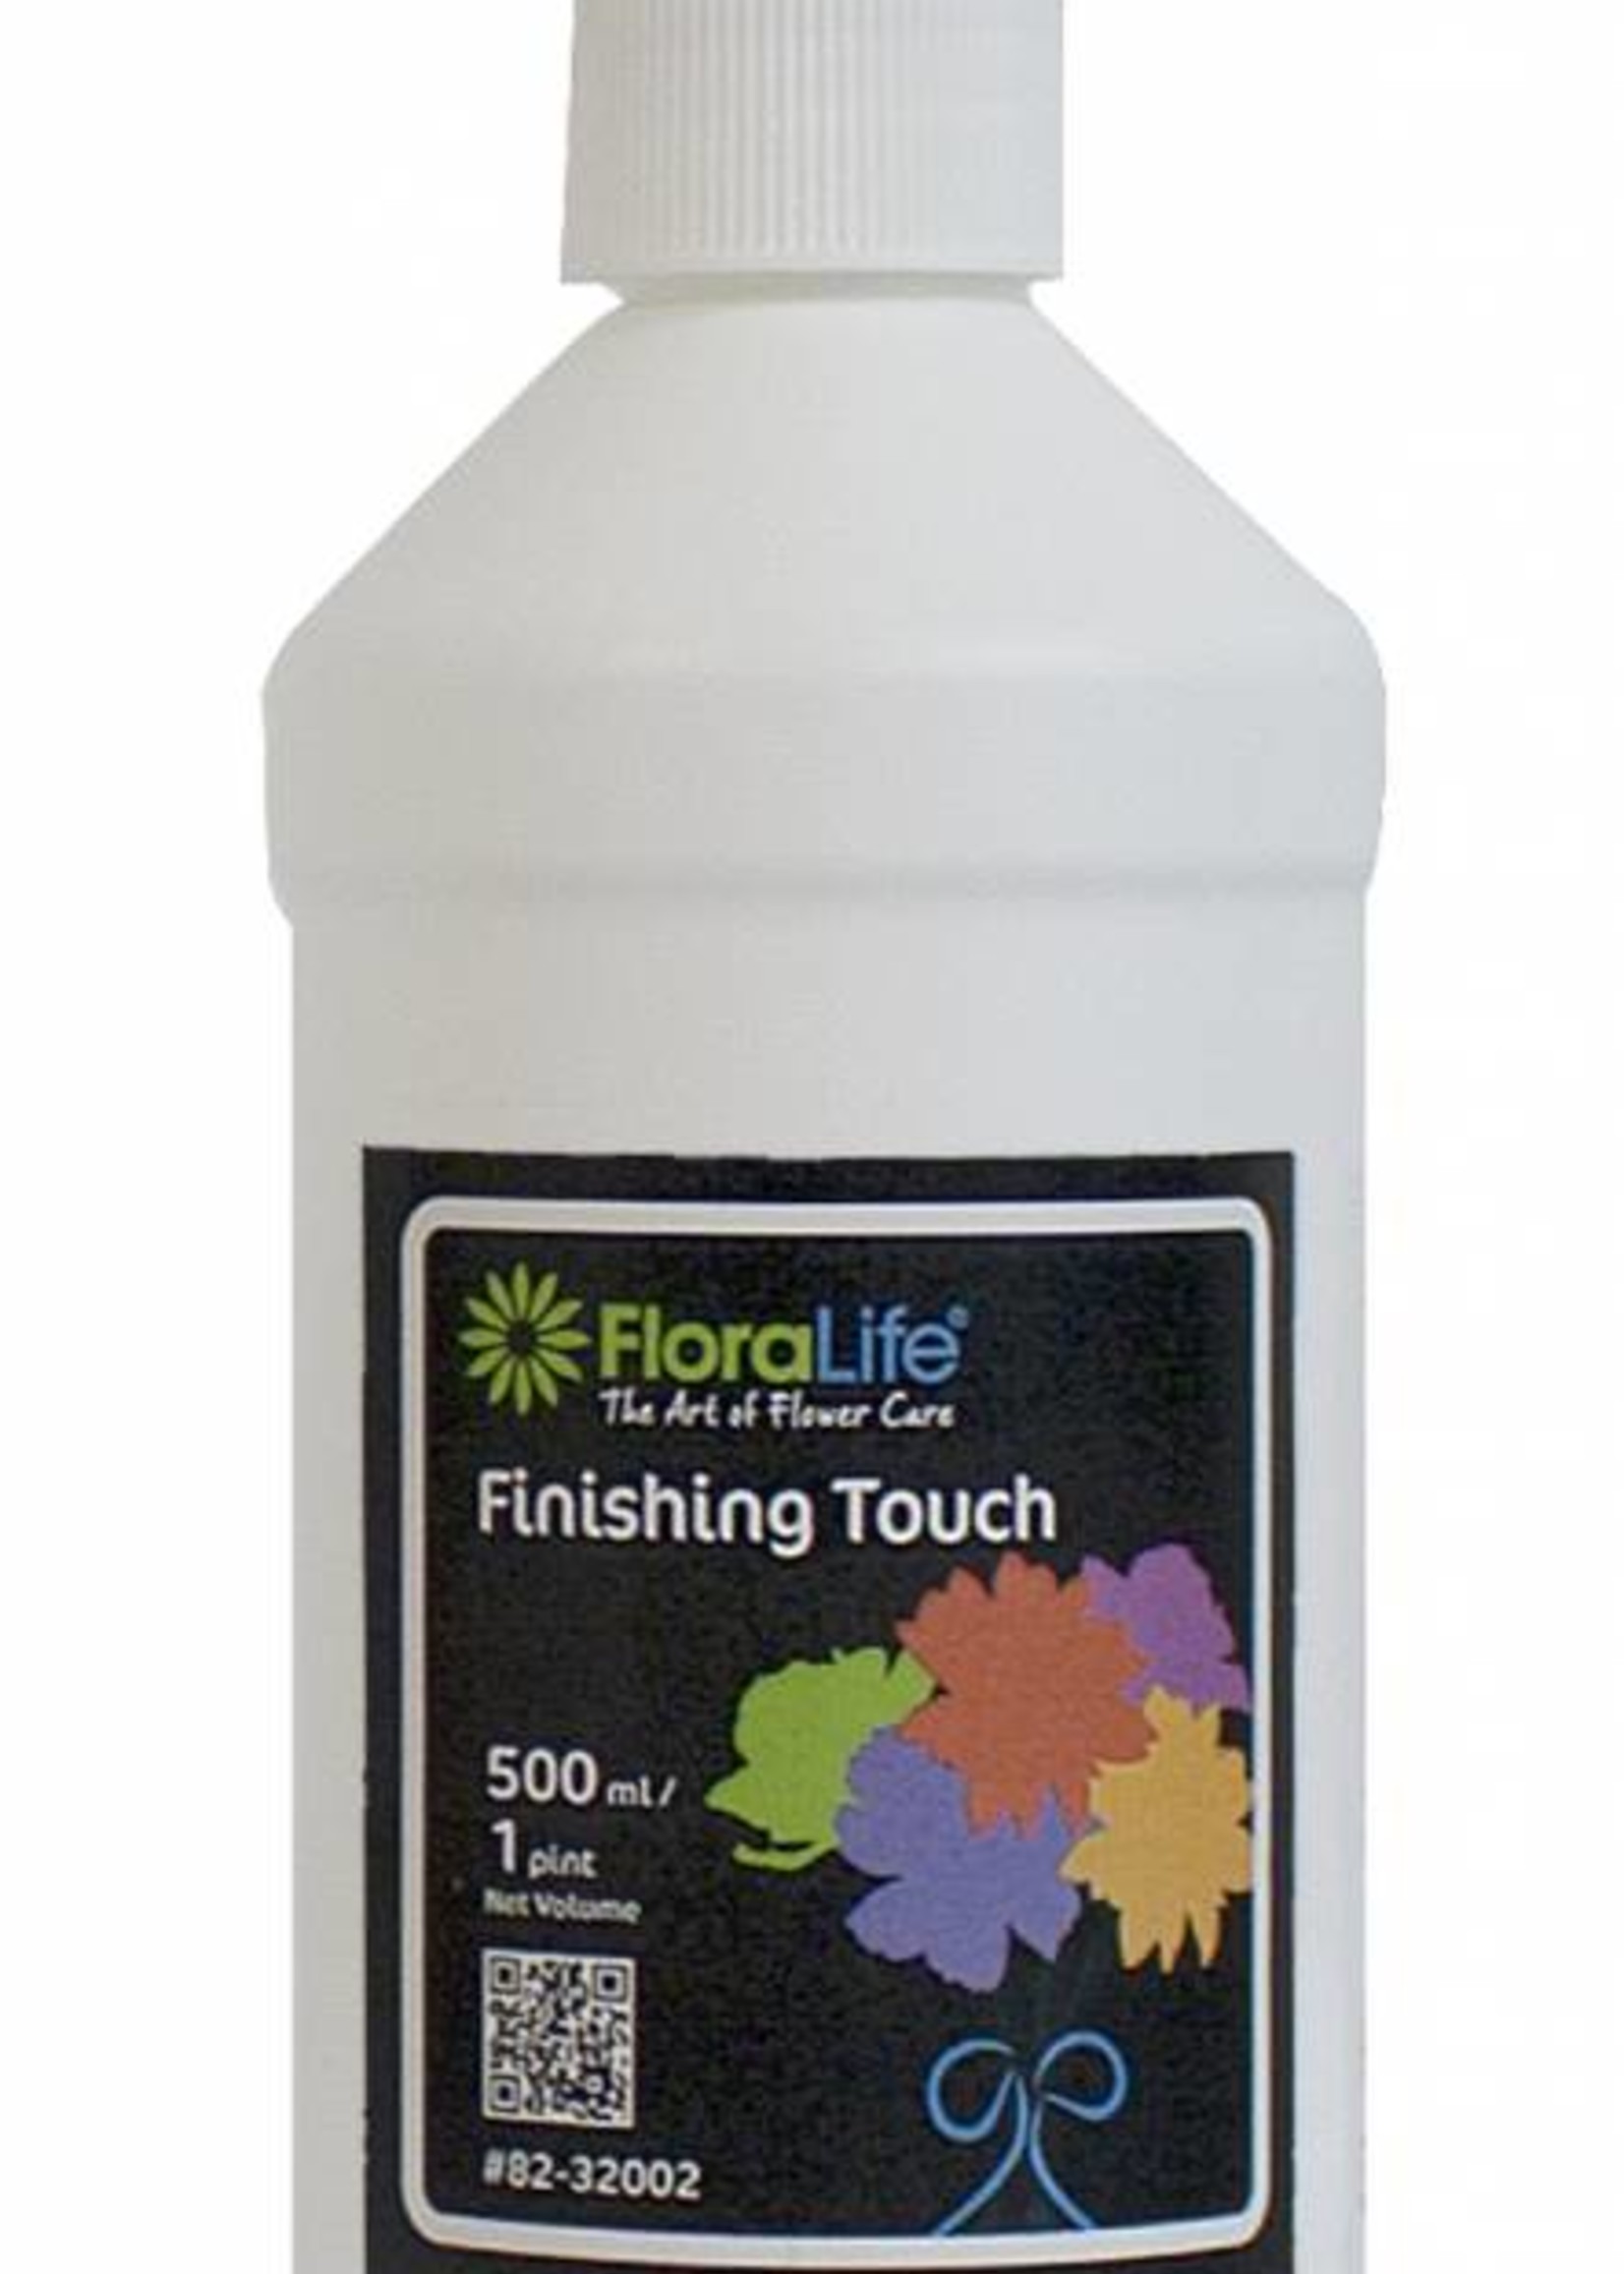 Floralife® Finishing Touch hydration spray